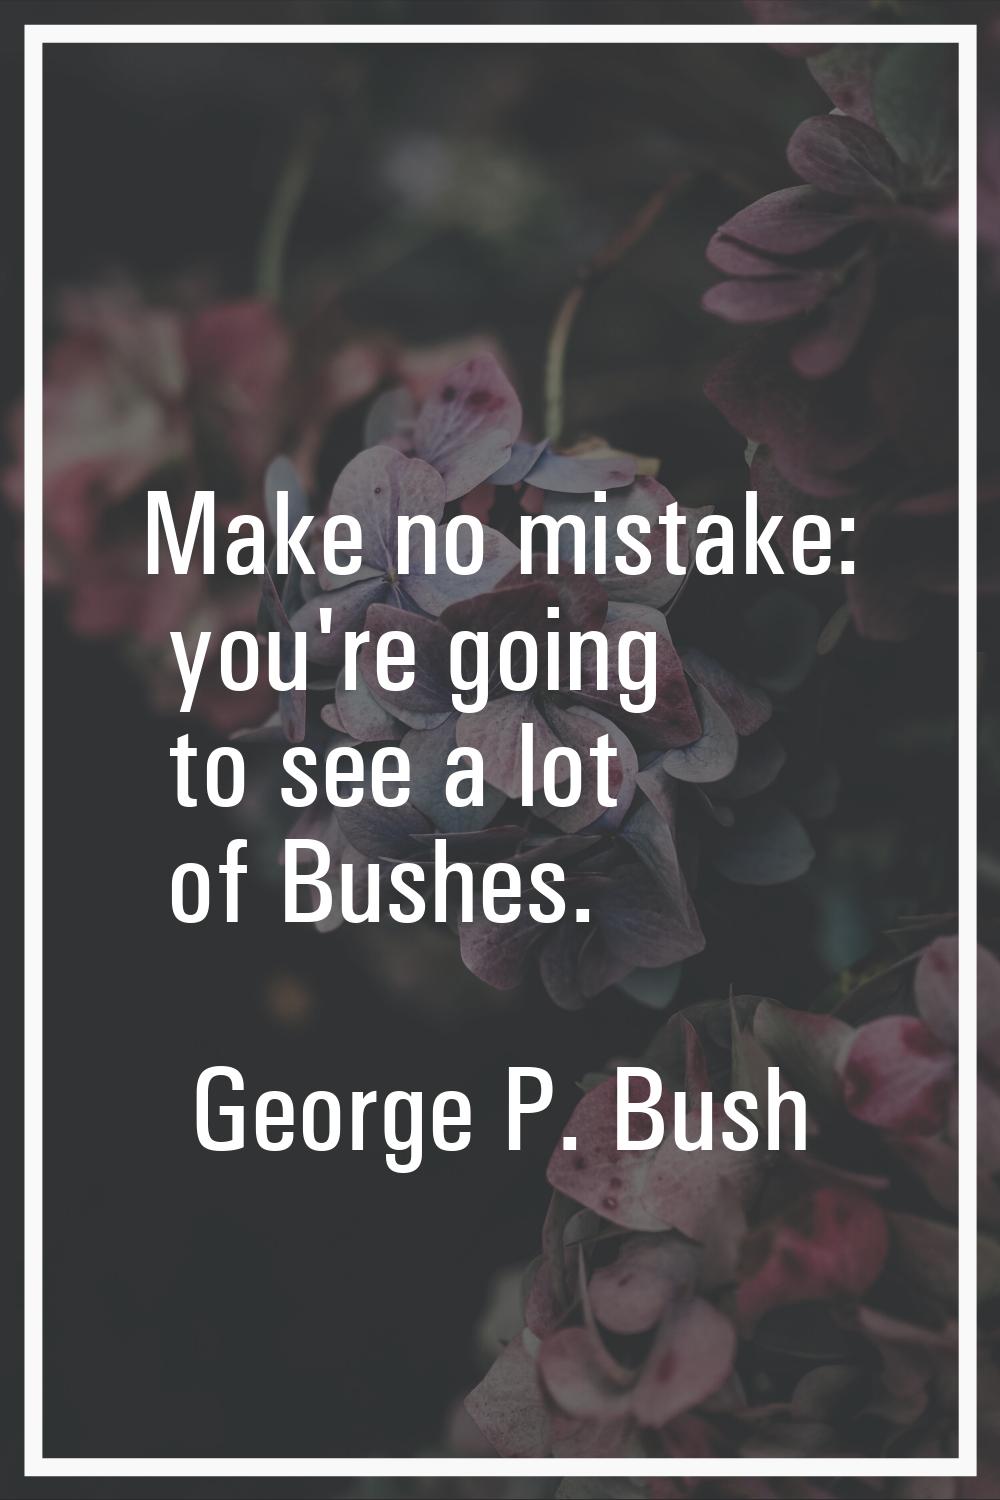 Make no mistake: you're going to see a lot of Bushes.